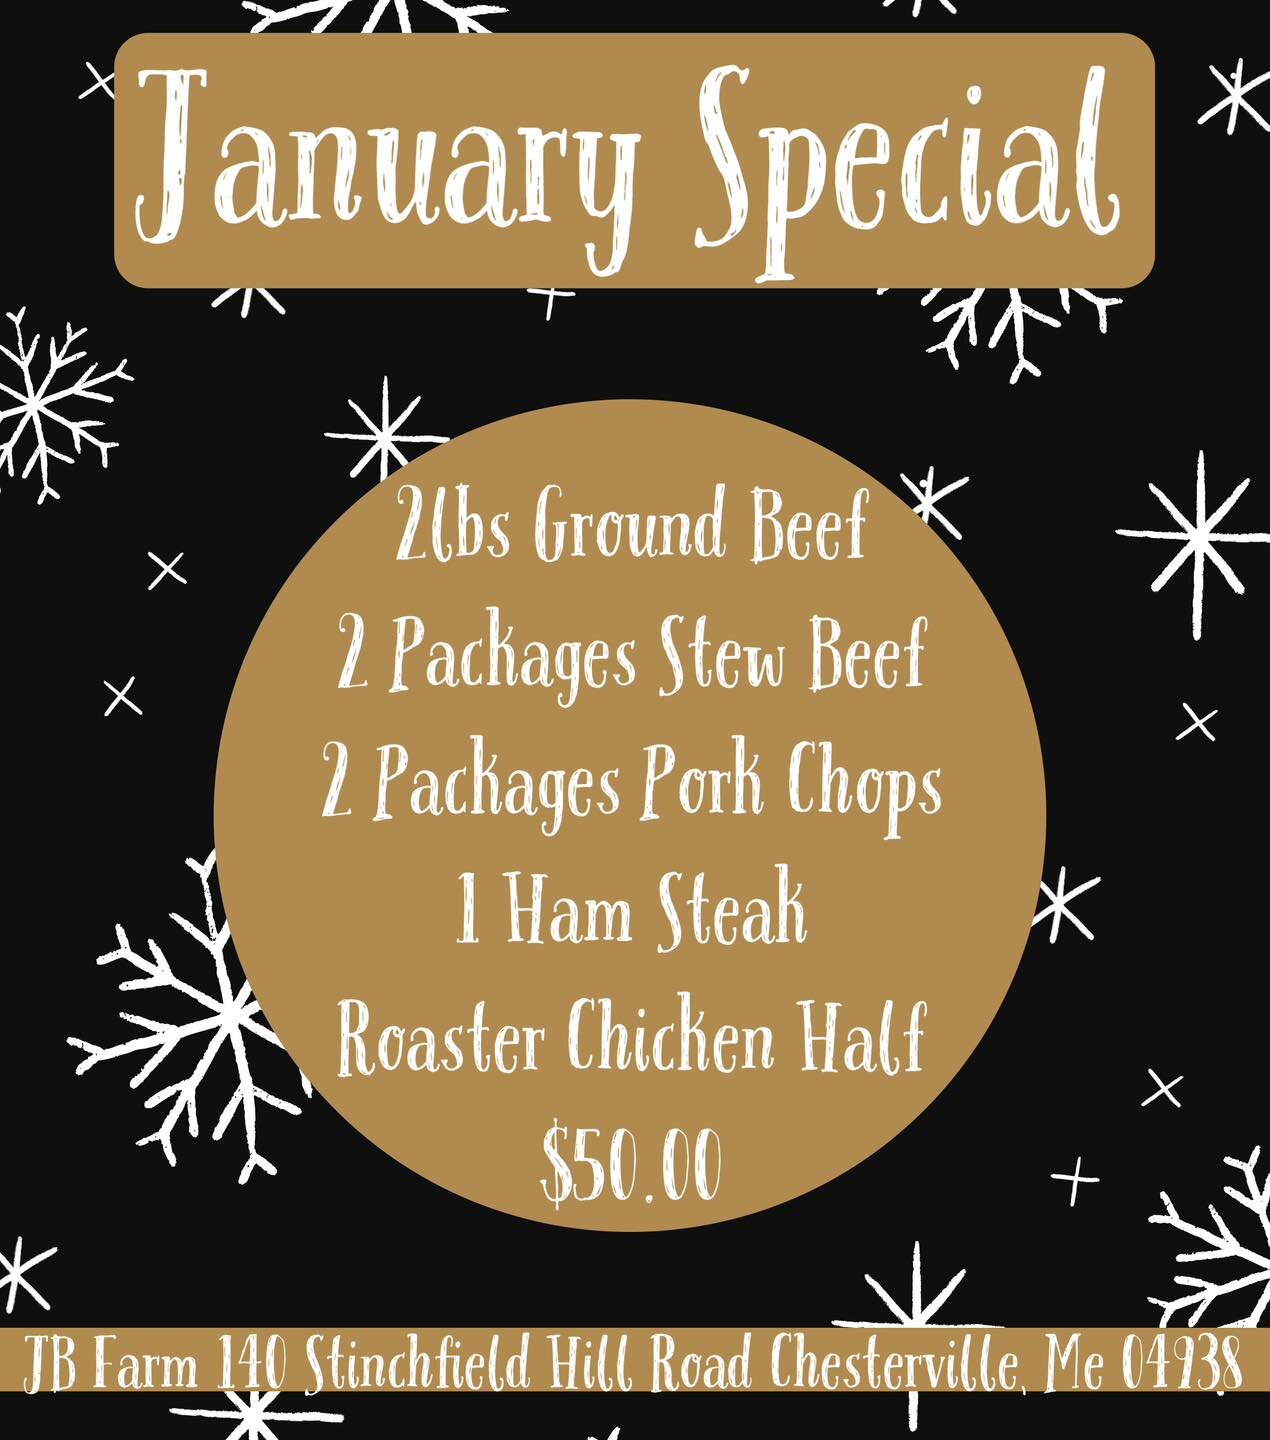 Check out our January special!
We&rsquo;ll be open Saturday and Sunday 8-1!
We will also have Maple Baked Beans until they sell out!